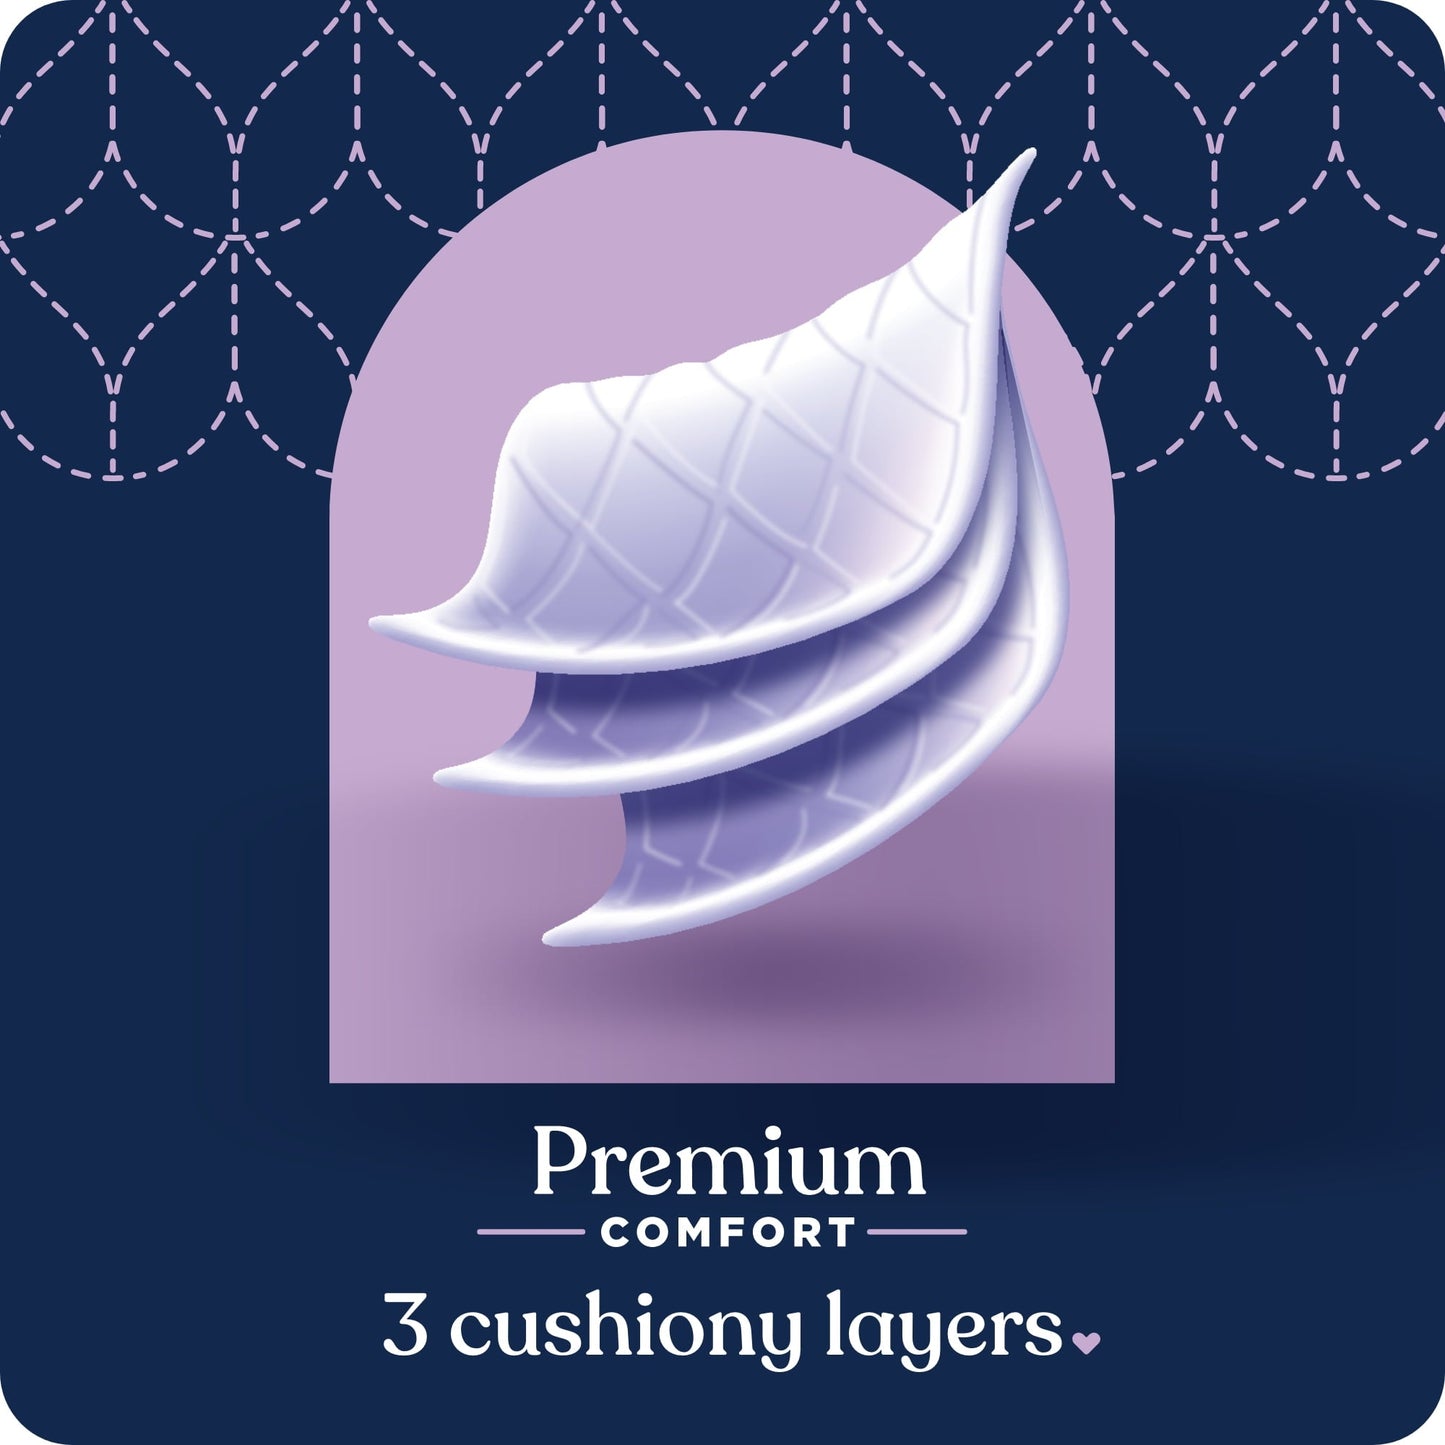 Quilted Northern Ultra Plush 24 Mega Rolls, 3X More Absorbent*, Luxurious Soft Toilet Paper